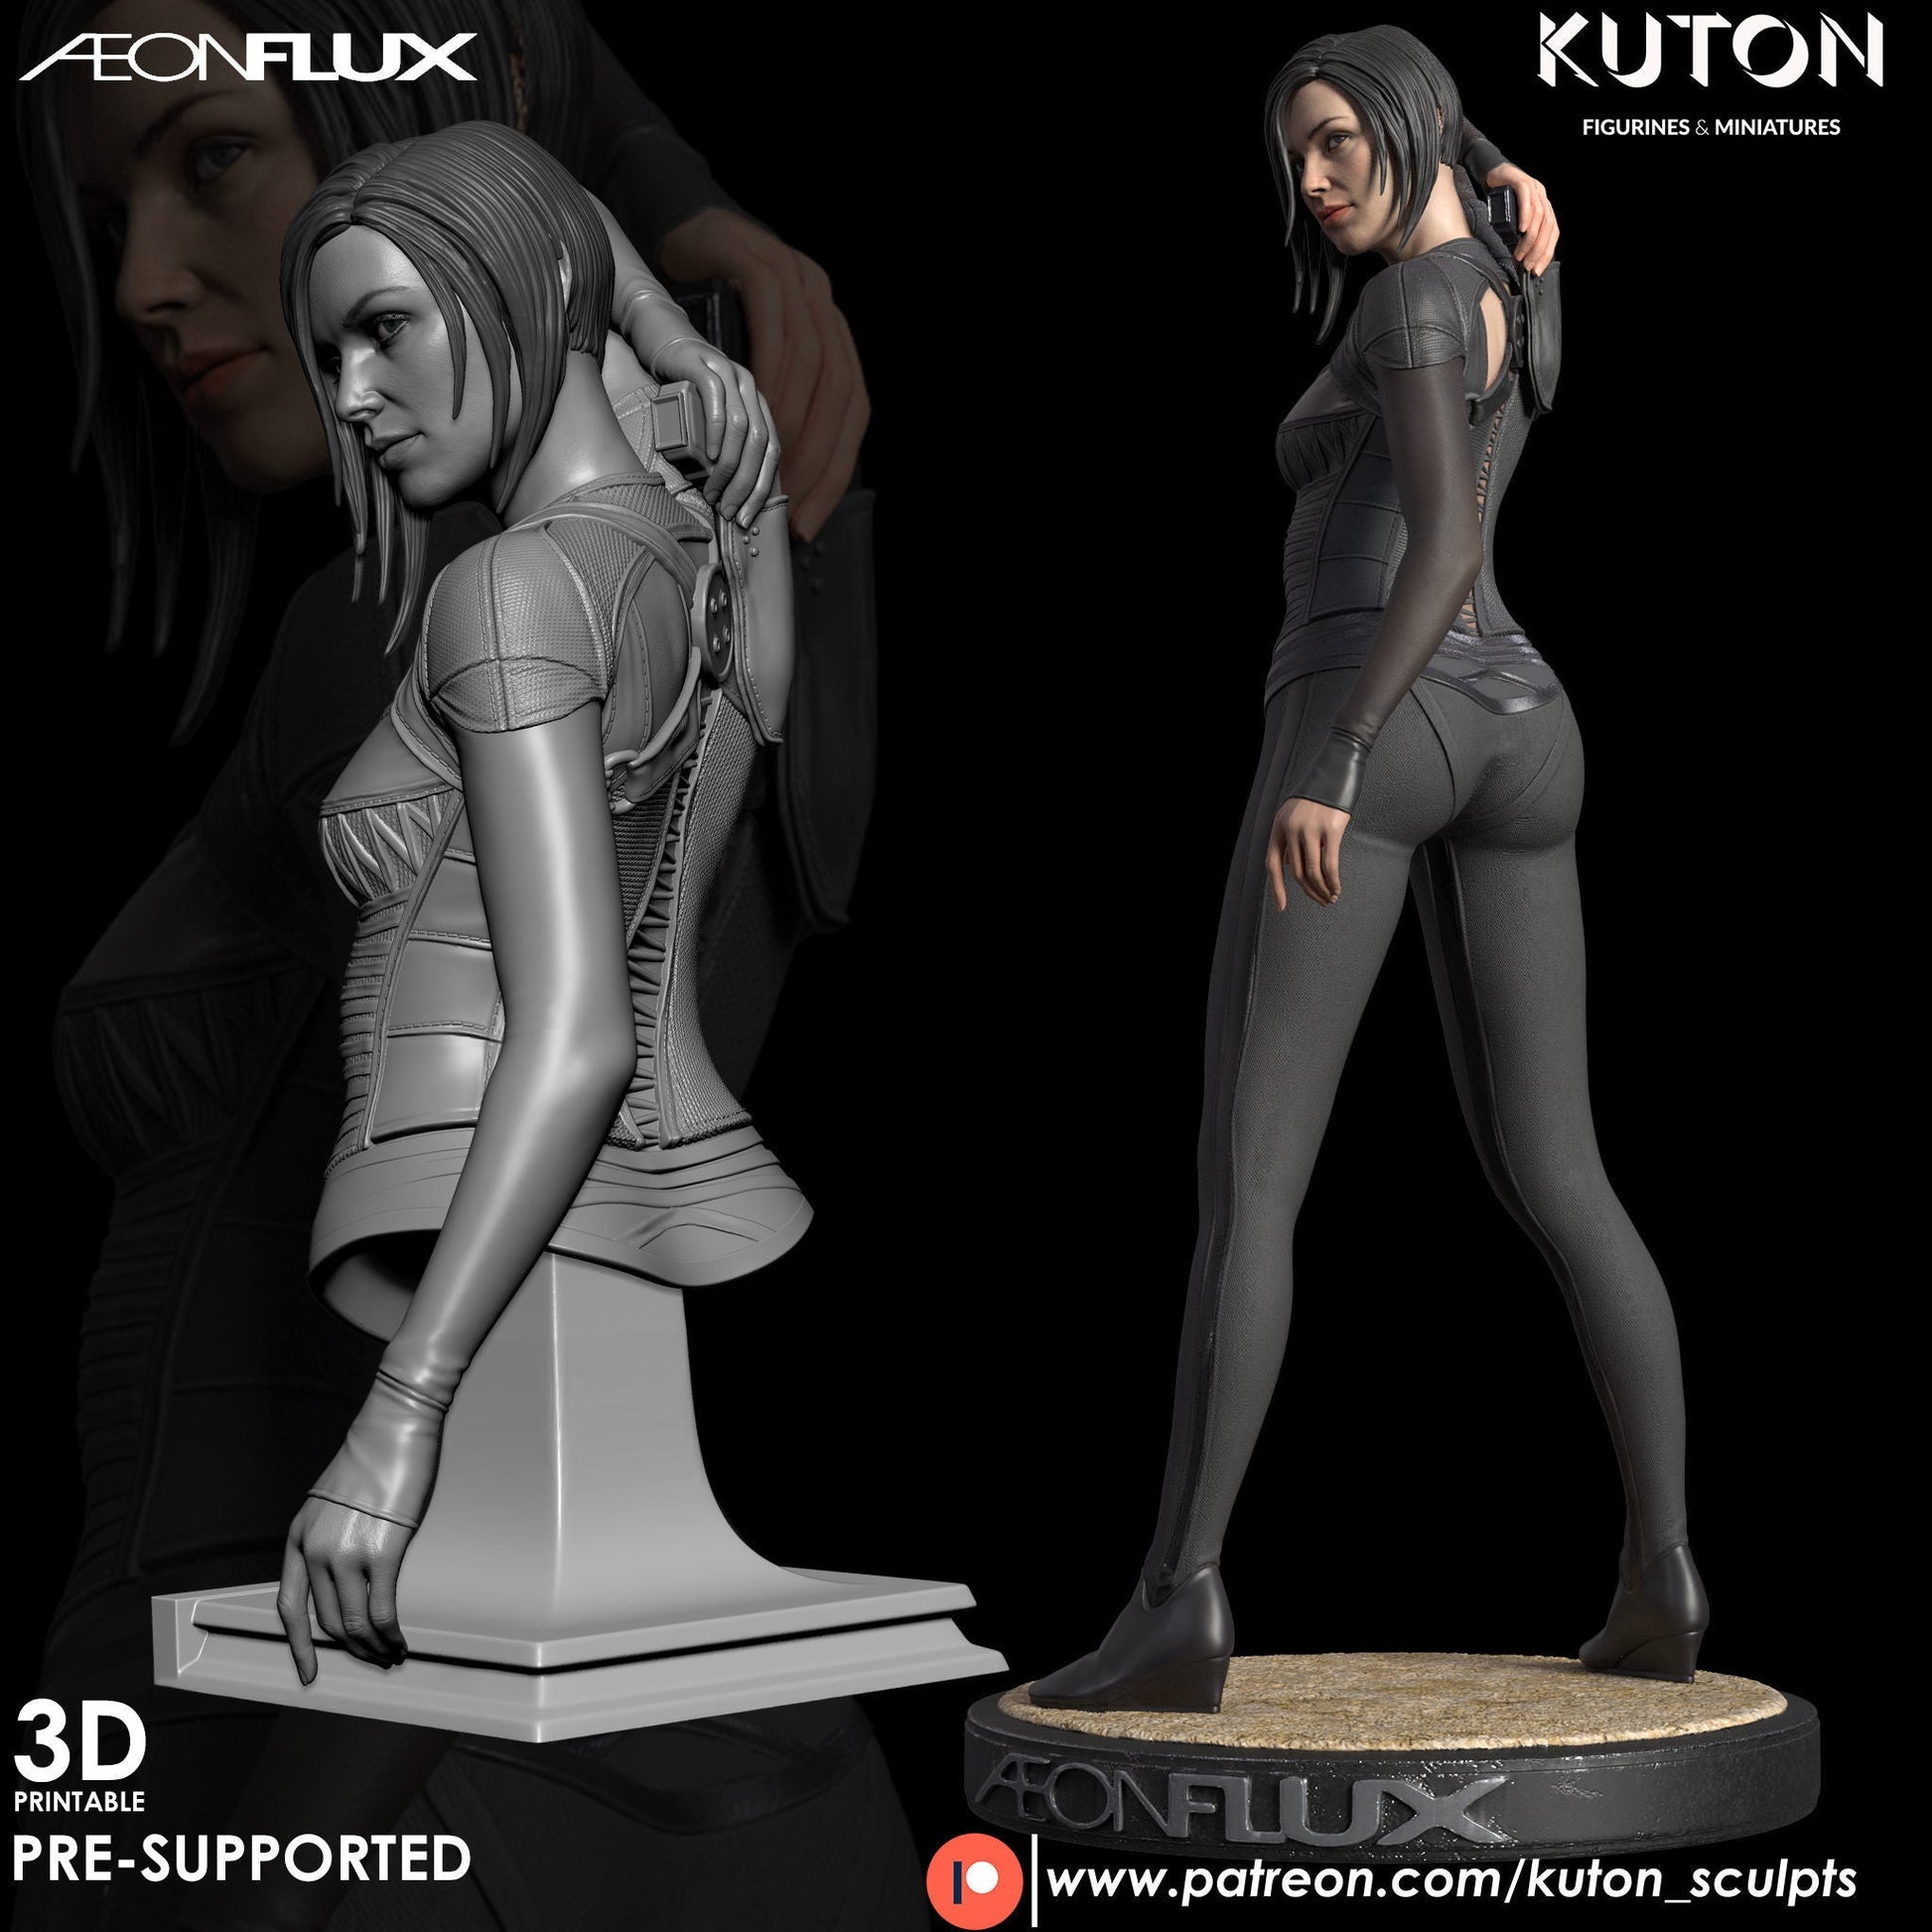 AEon Flux BUST 3d printed Resin Figure Model Kit miniatures figurines collectibles and scale models UNPAINTED Fun Art